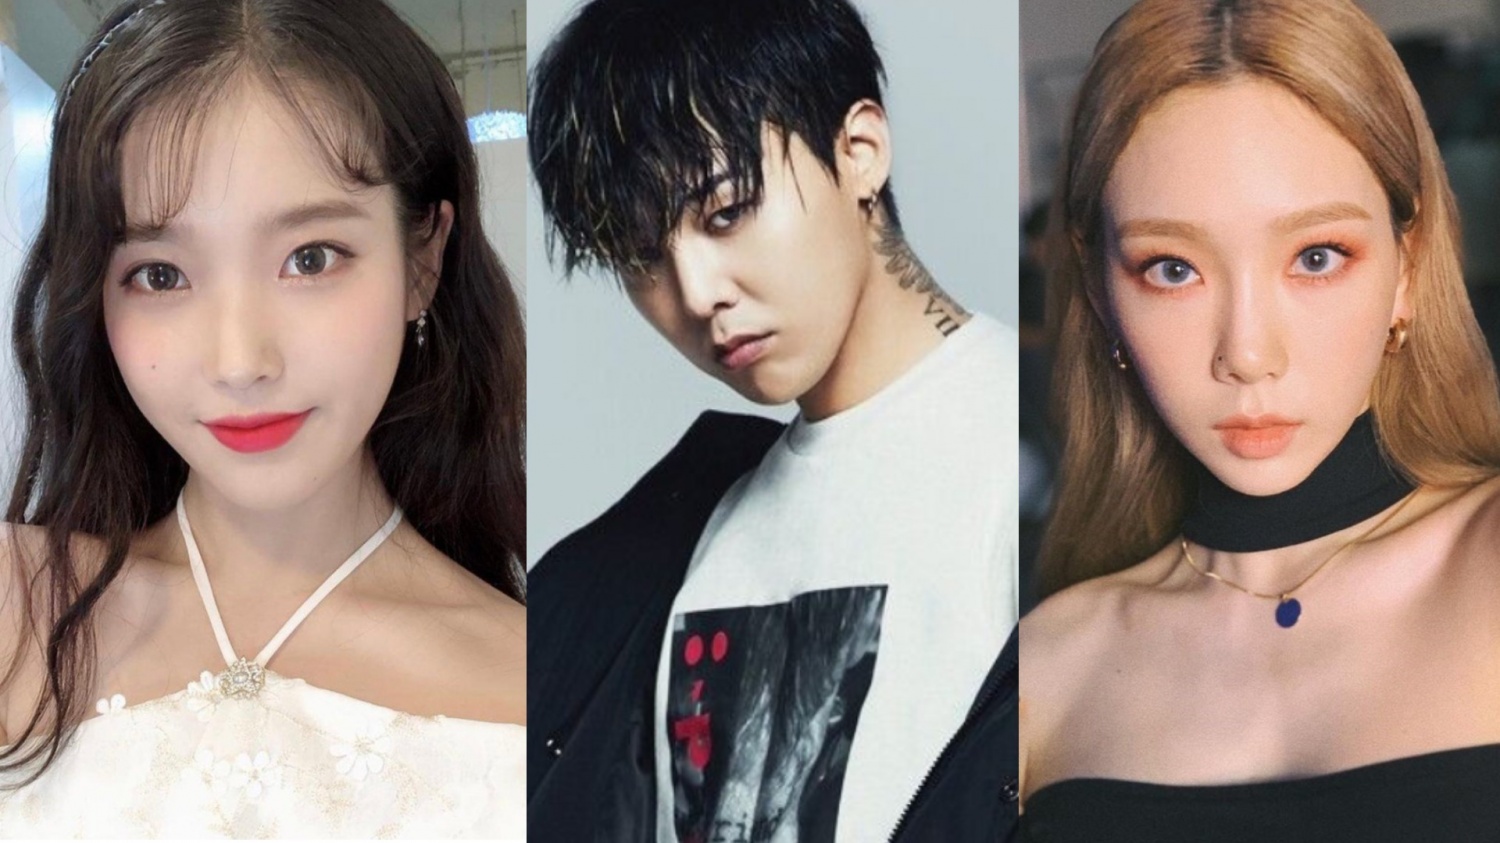 These 5 Kpop Idols Were Involved in Several Dating Scandals Which